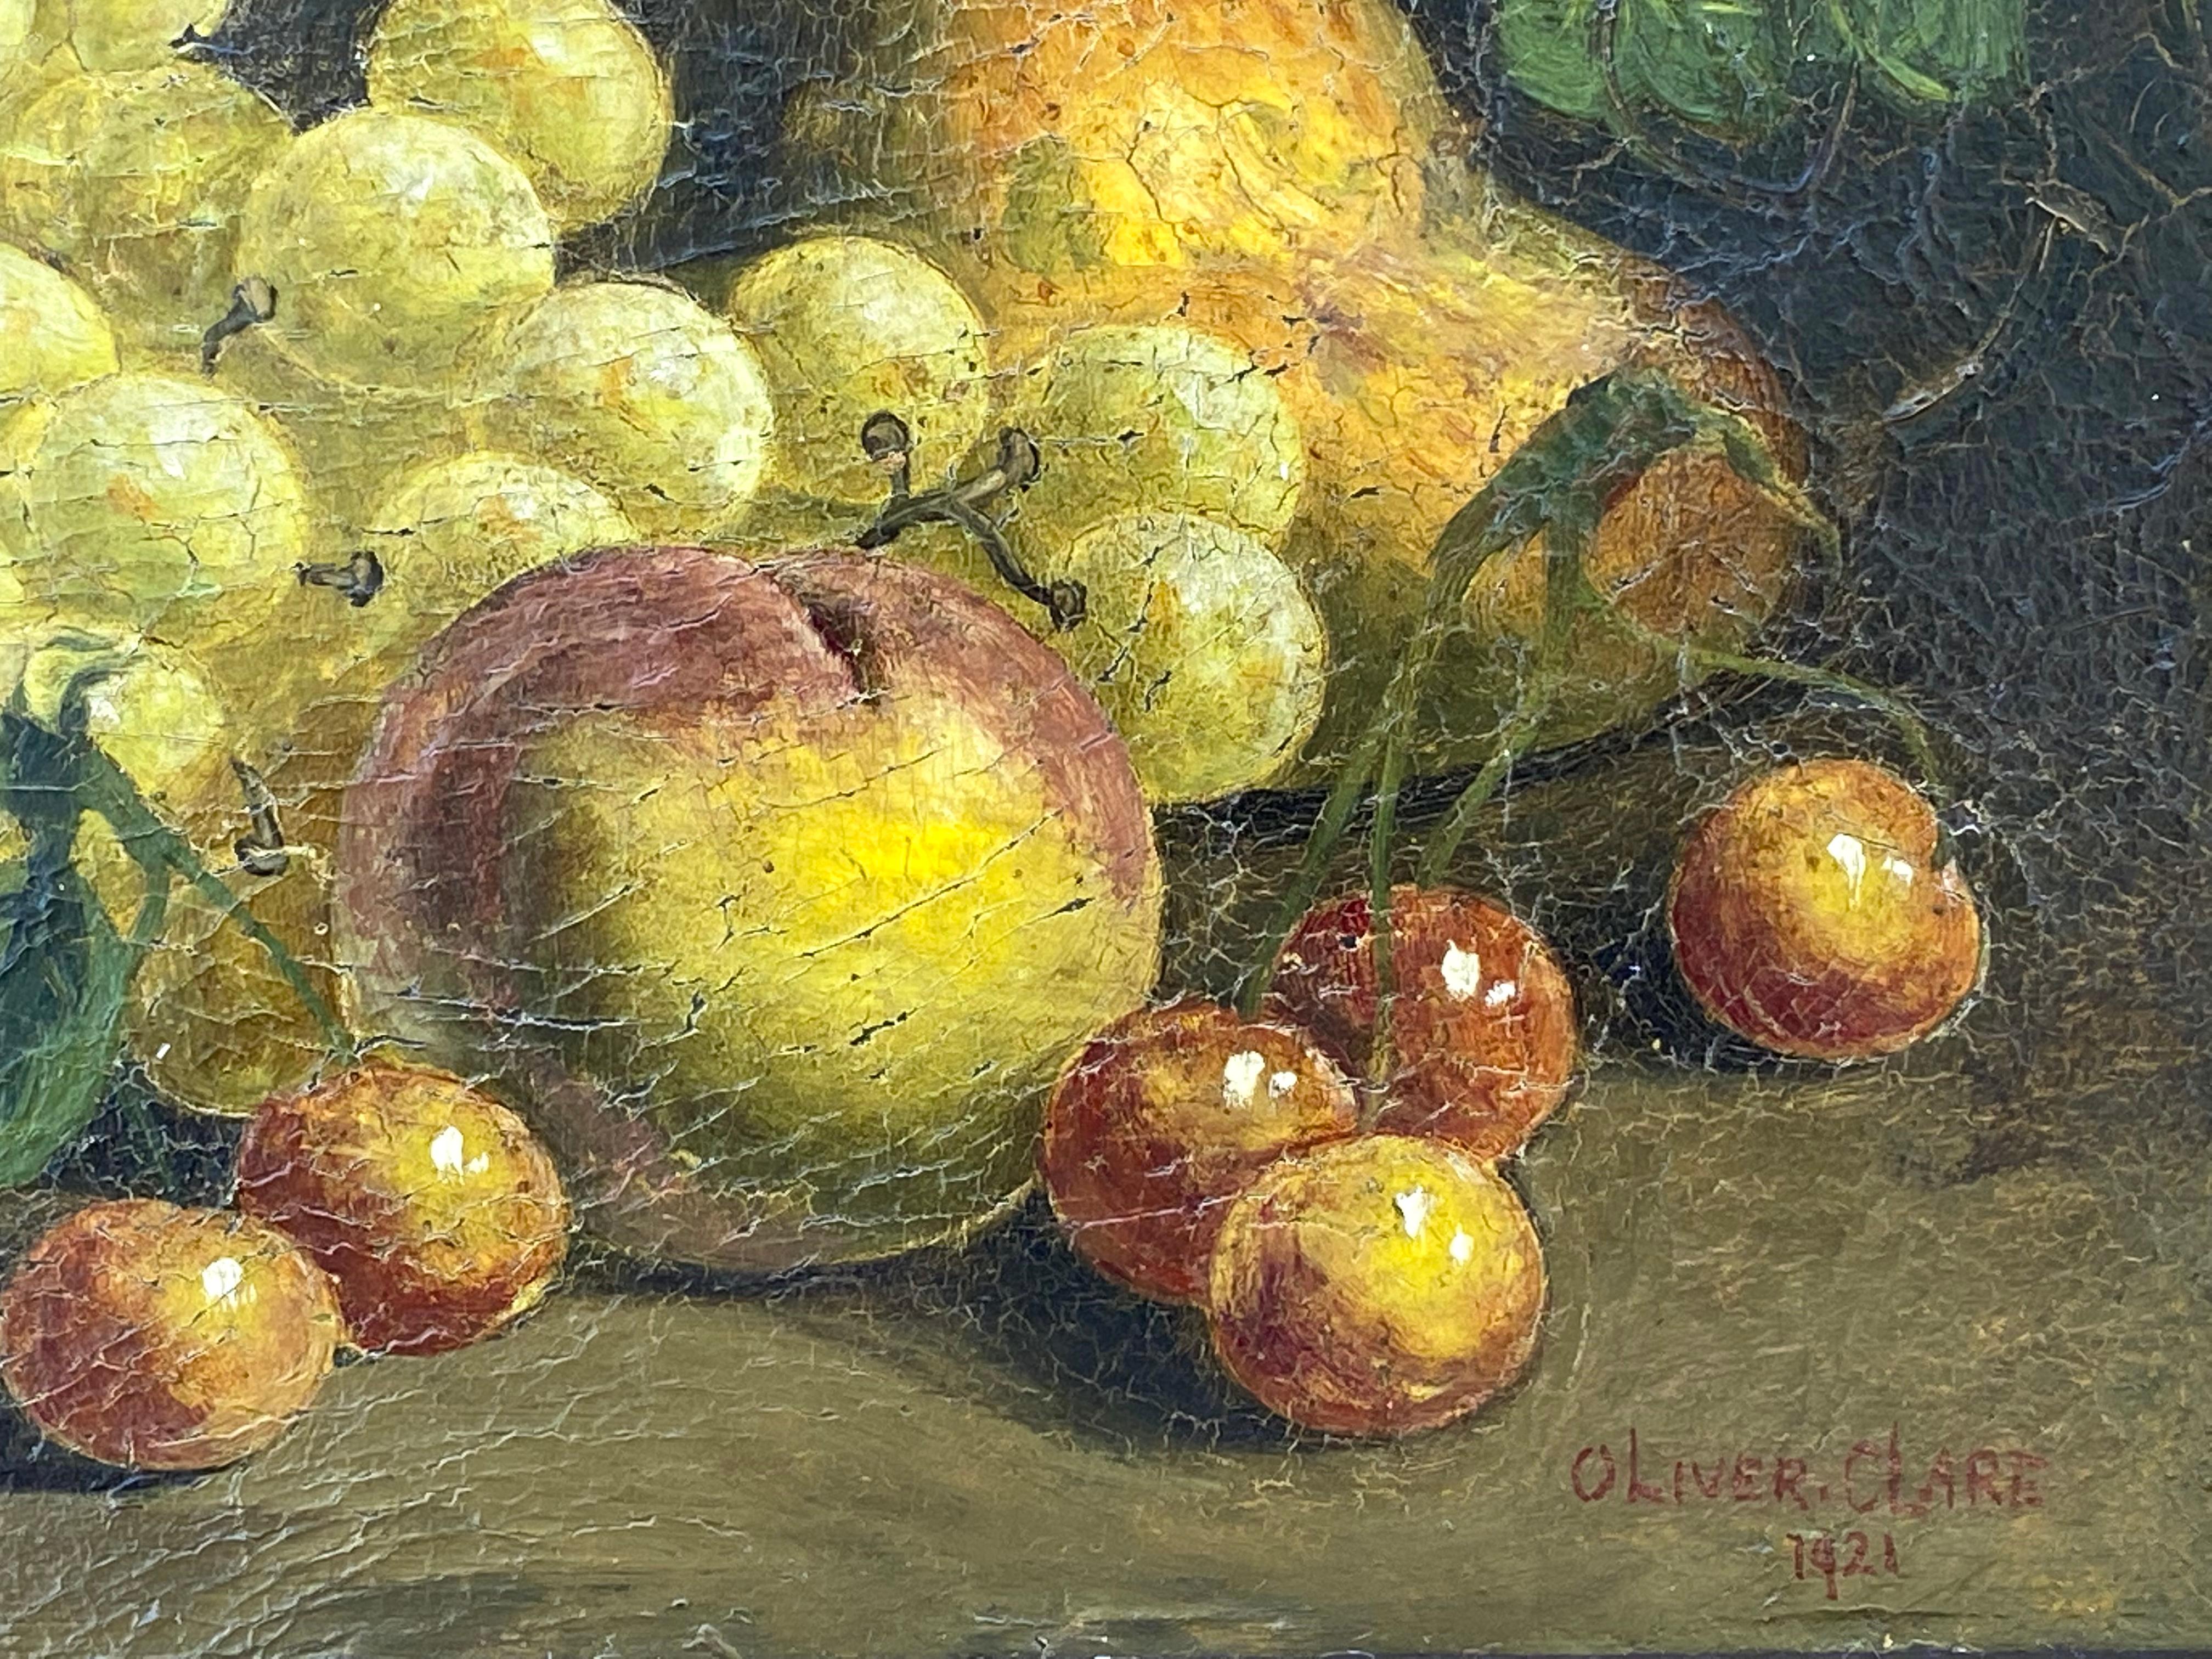 “Still Life with Fruit” - Academic Painting by Oliver Clare